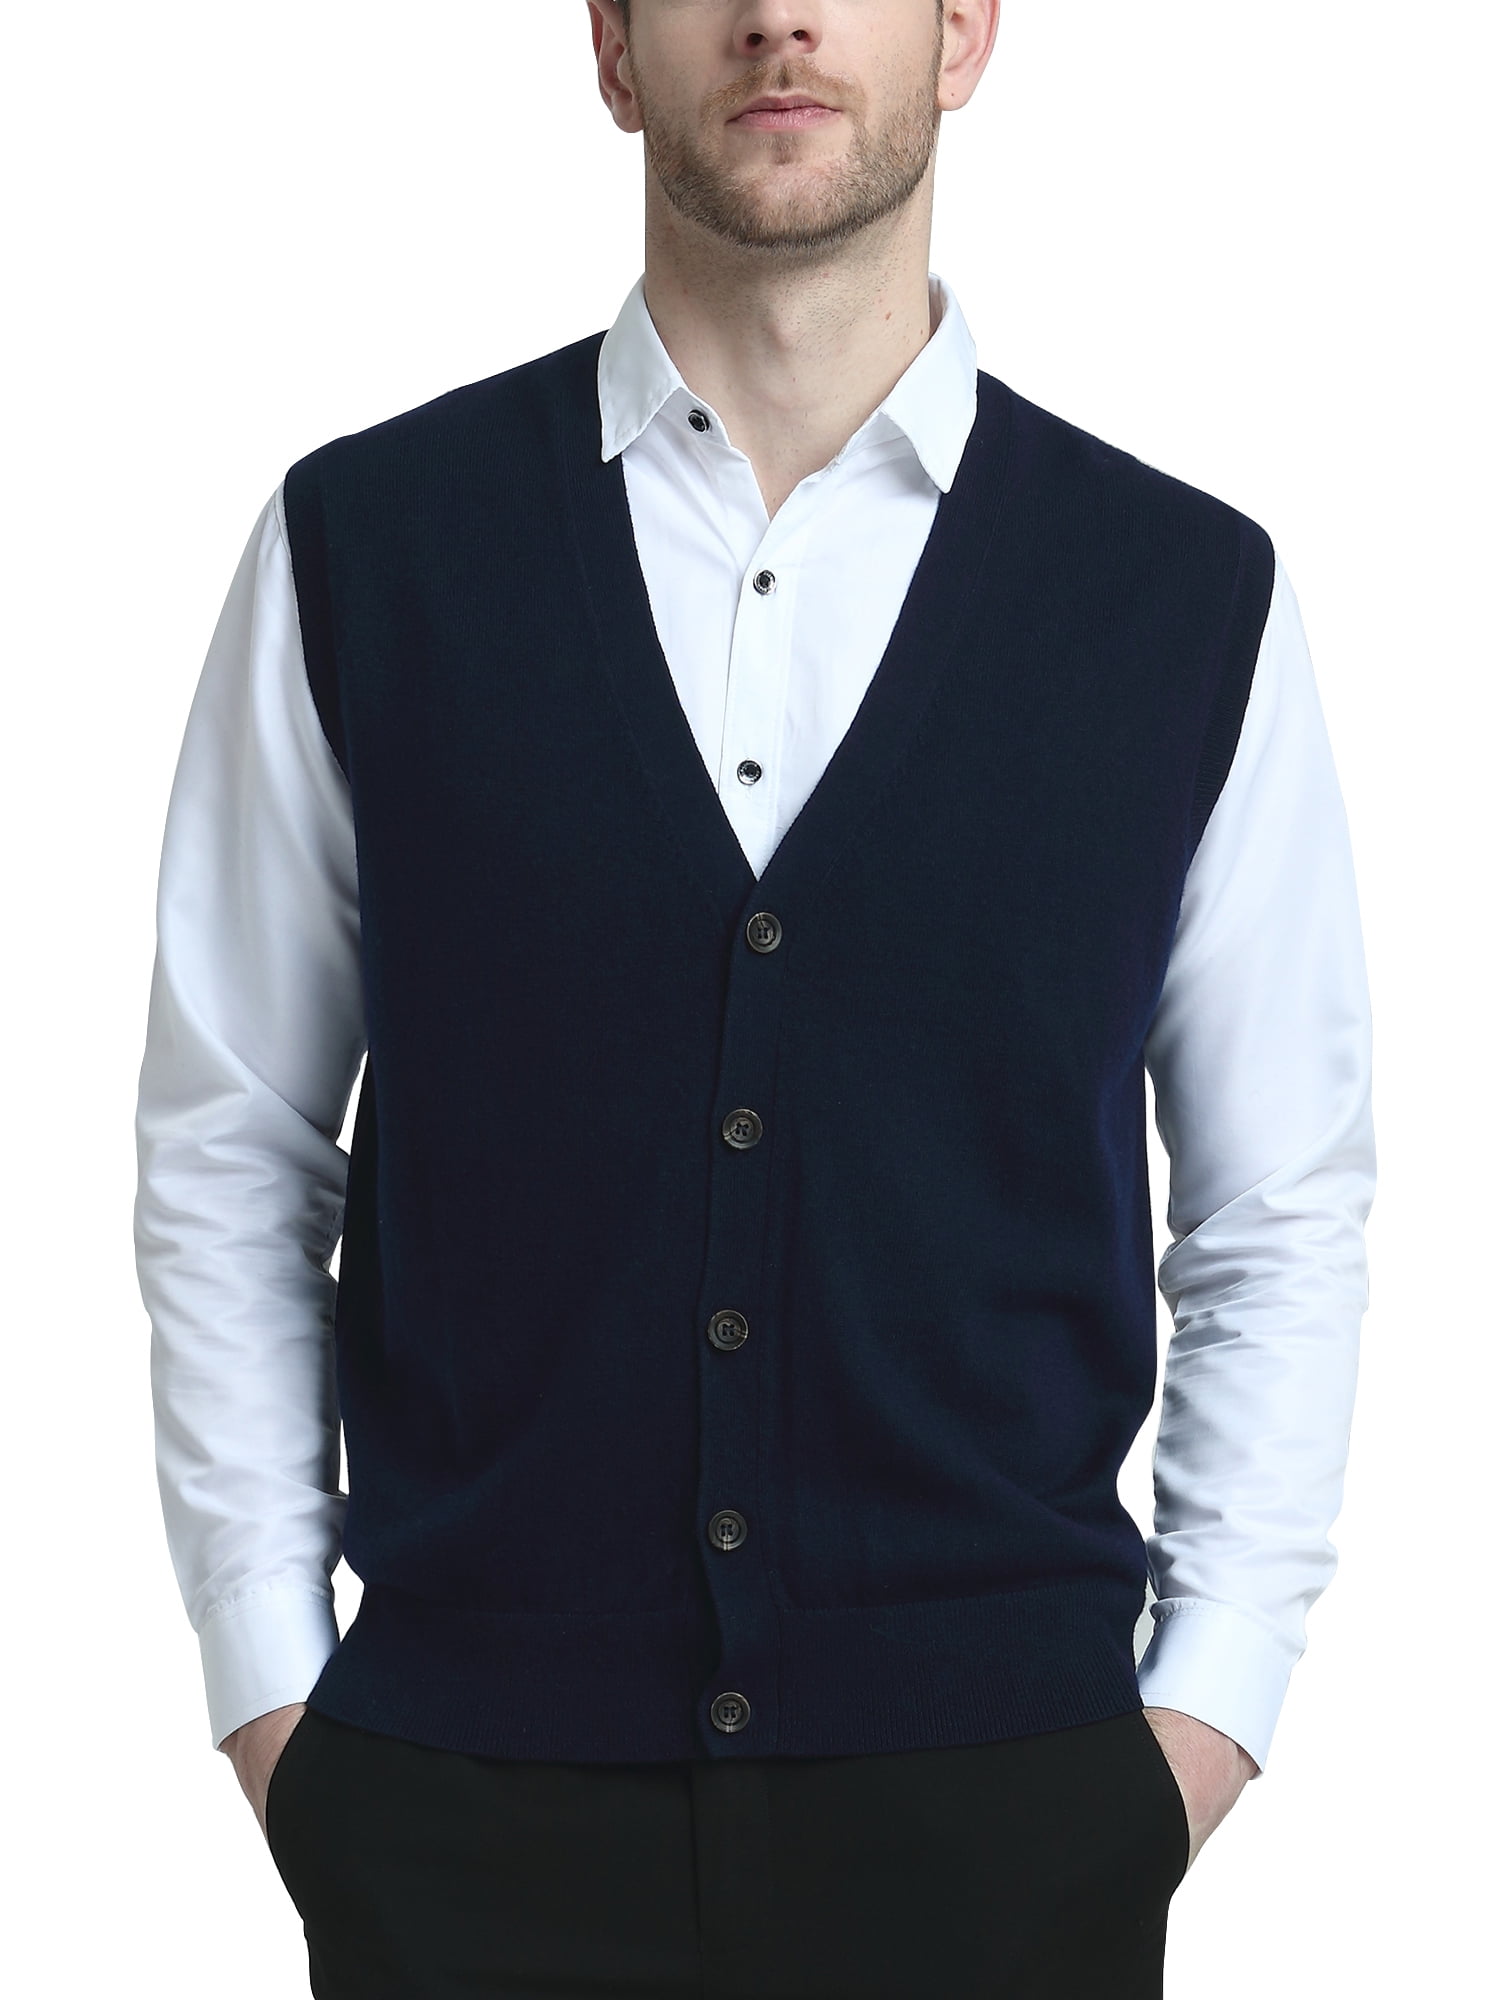 TOPTIE Mens Sweater Vest Solid Knitted Lightweight Thermal Cardigan 